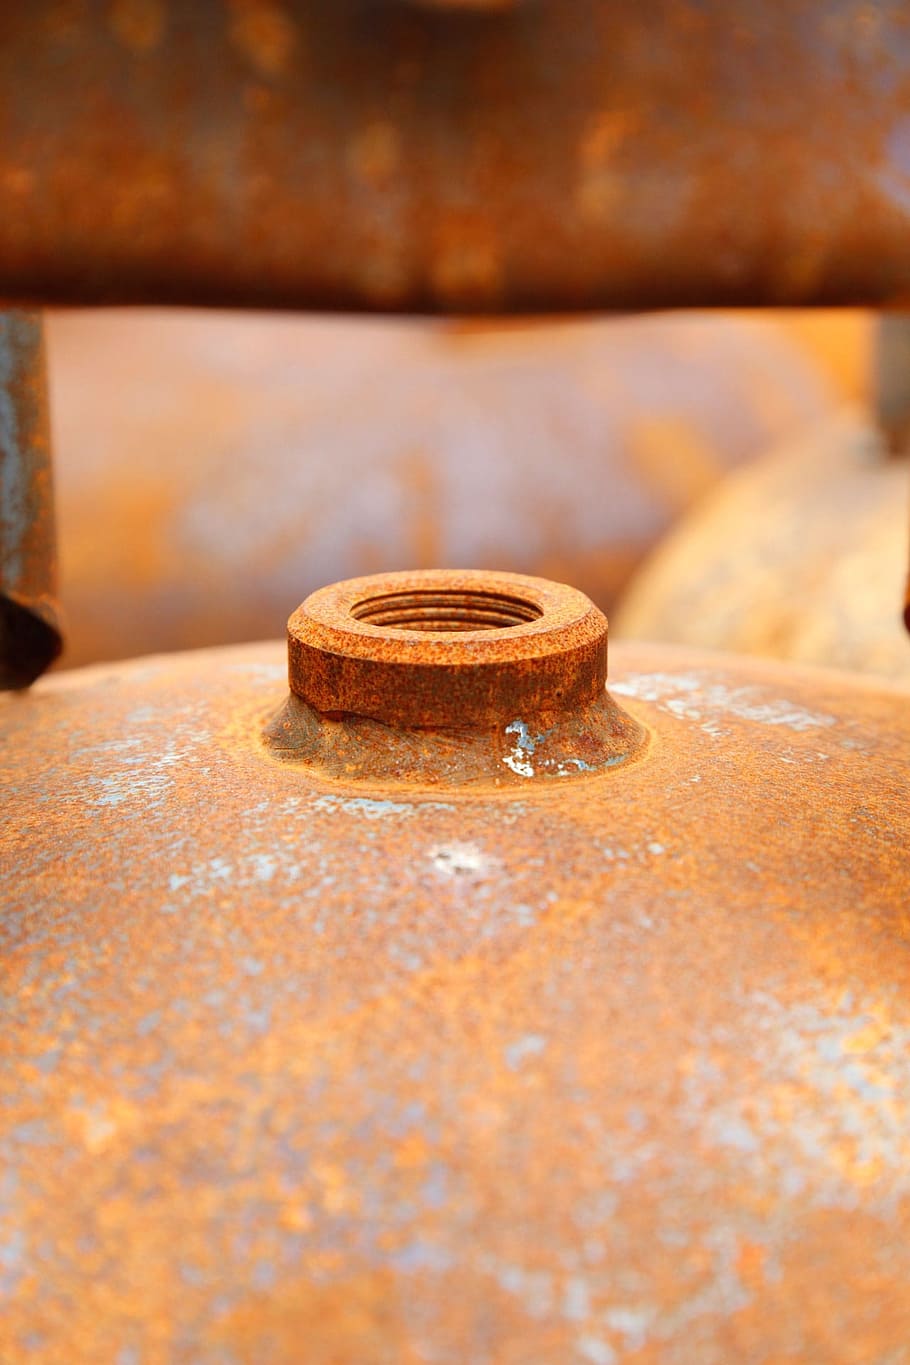 Rust, Texture, Oxide, Tank, Metal, coin, close-up, indoors, sweet food, day